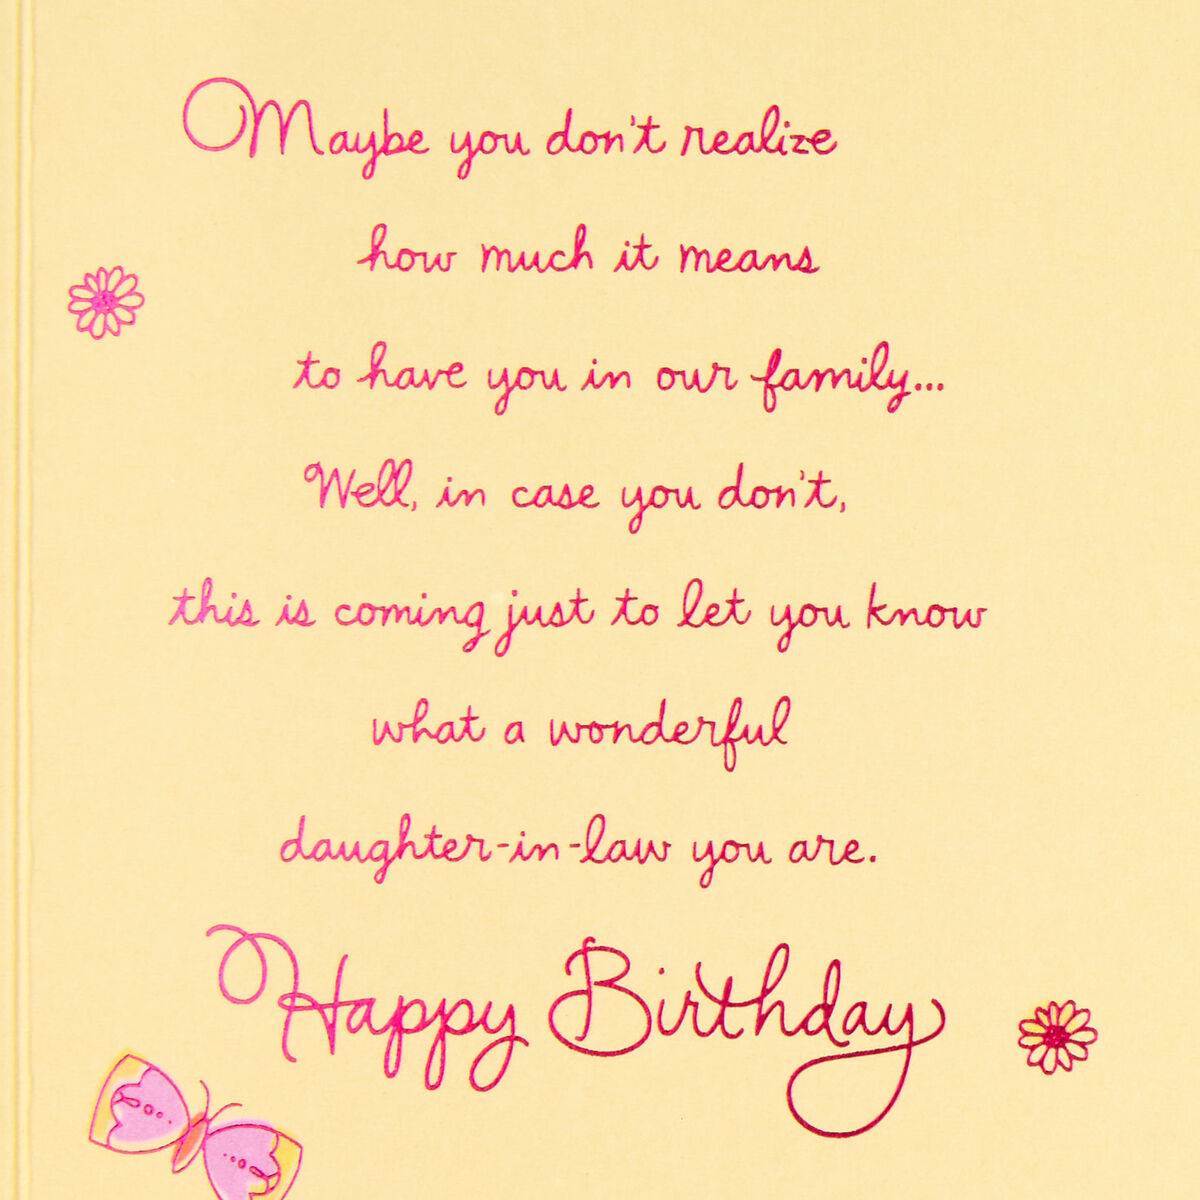 How Special You Are Birthday Card for Daughter-in-Law - Greeting Cards ...